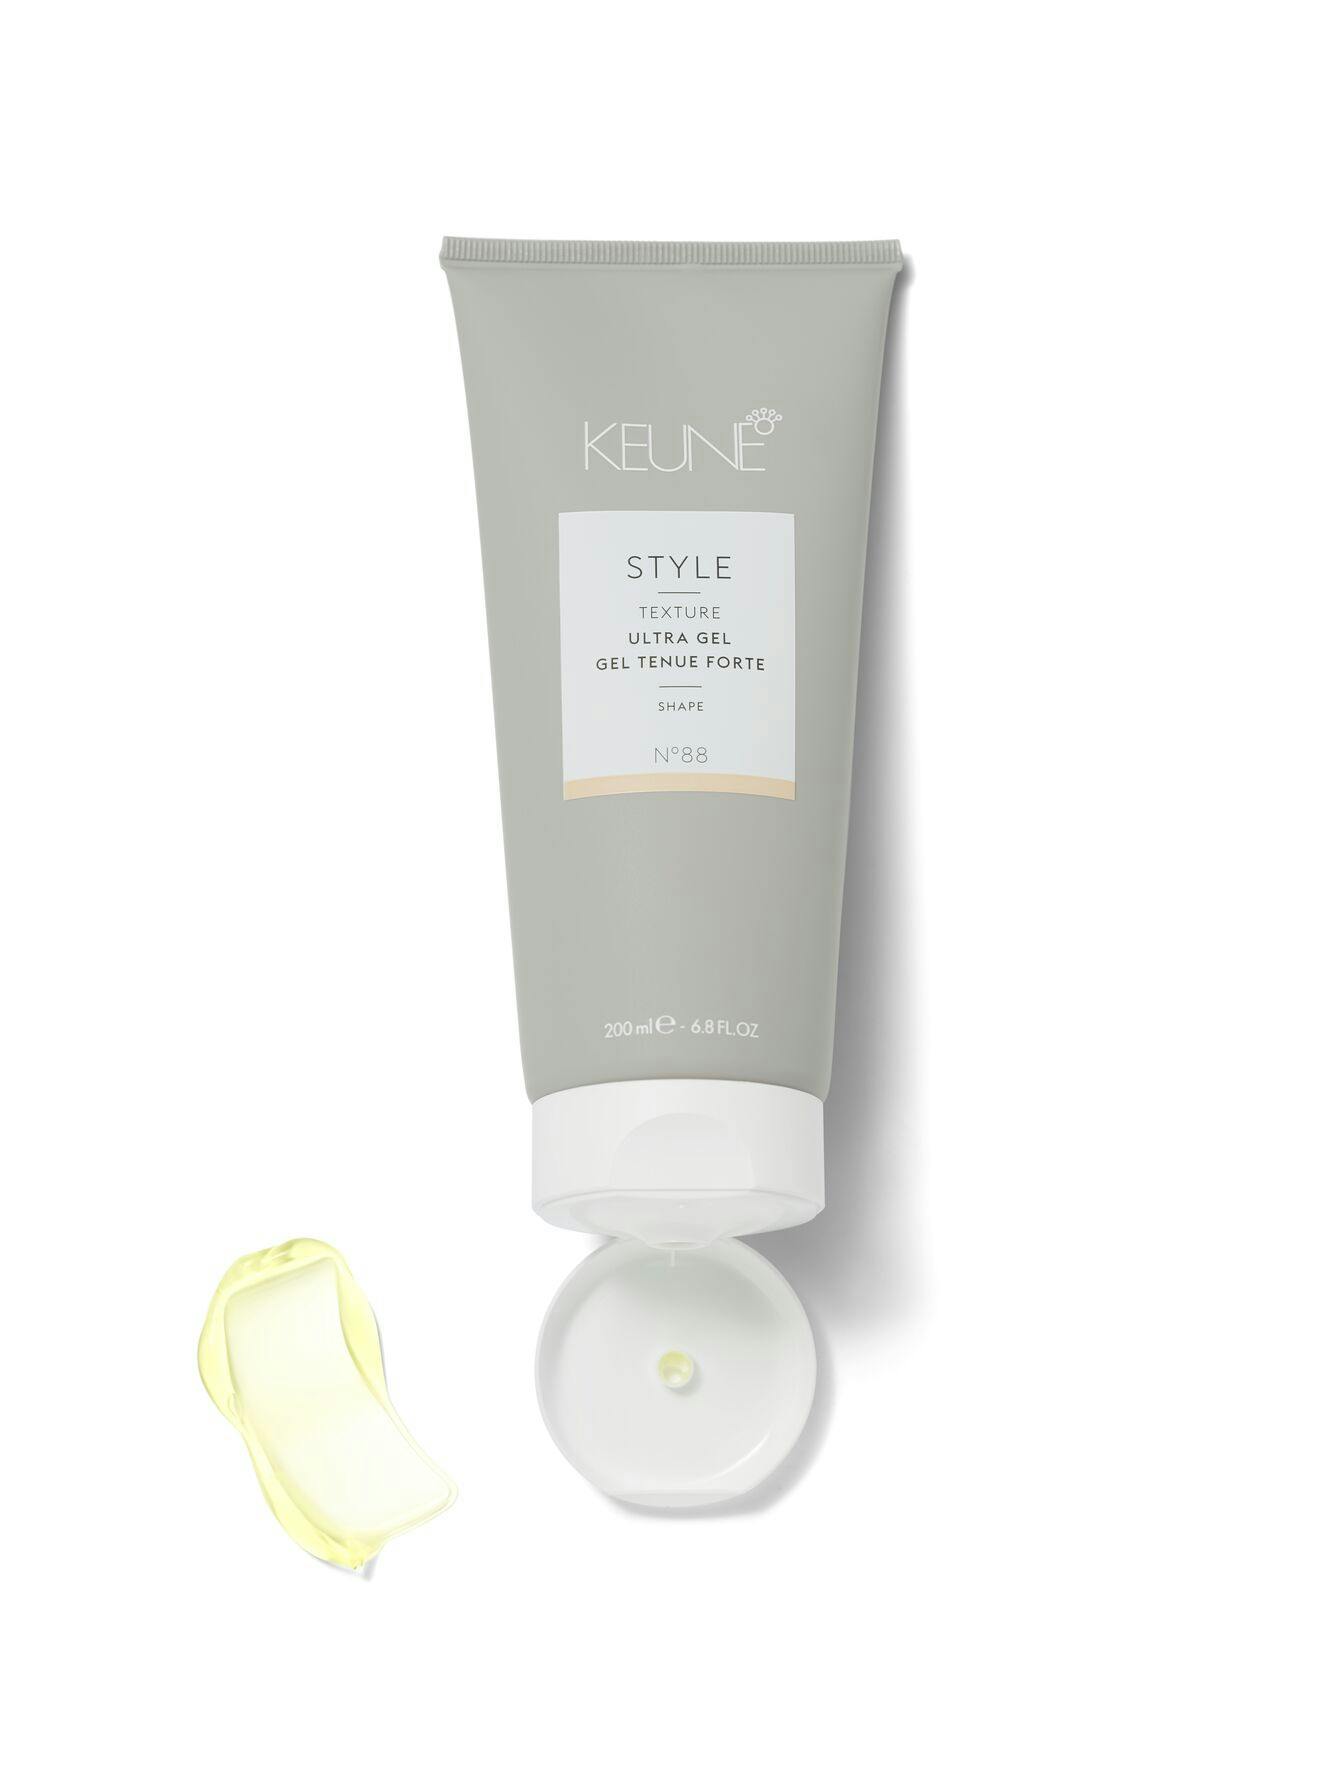 Image of tube and texture Keune Style Ultra Gel